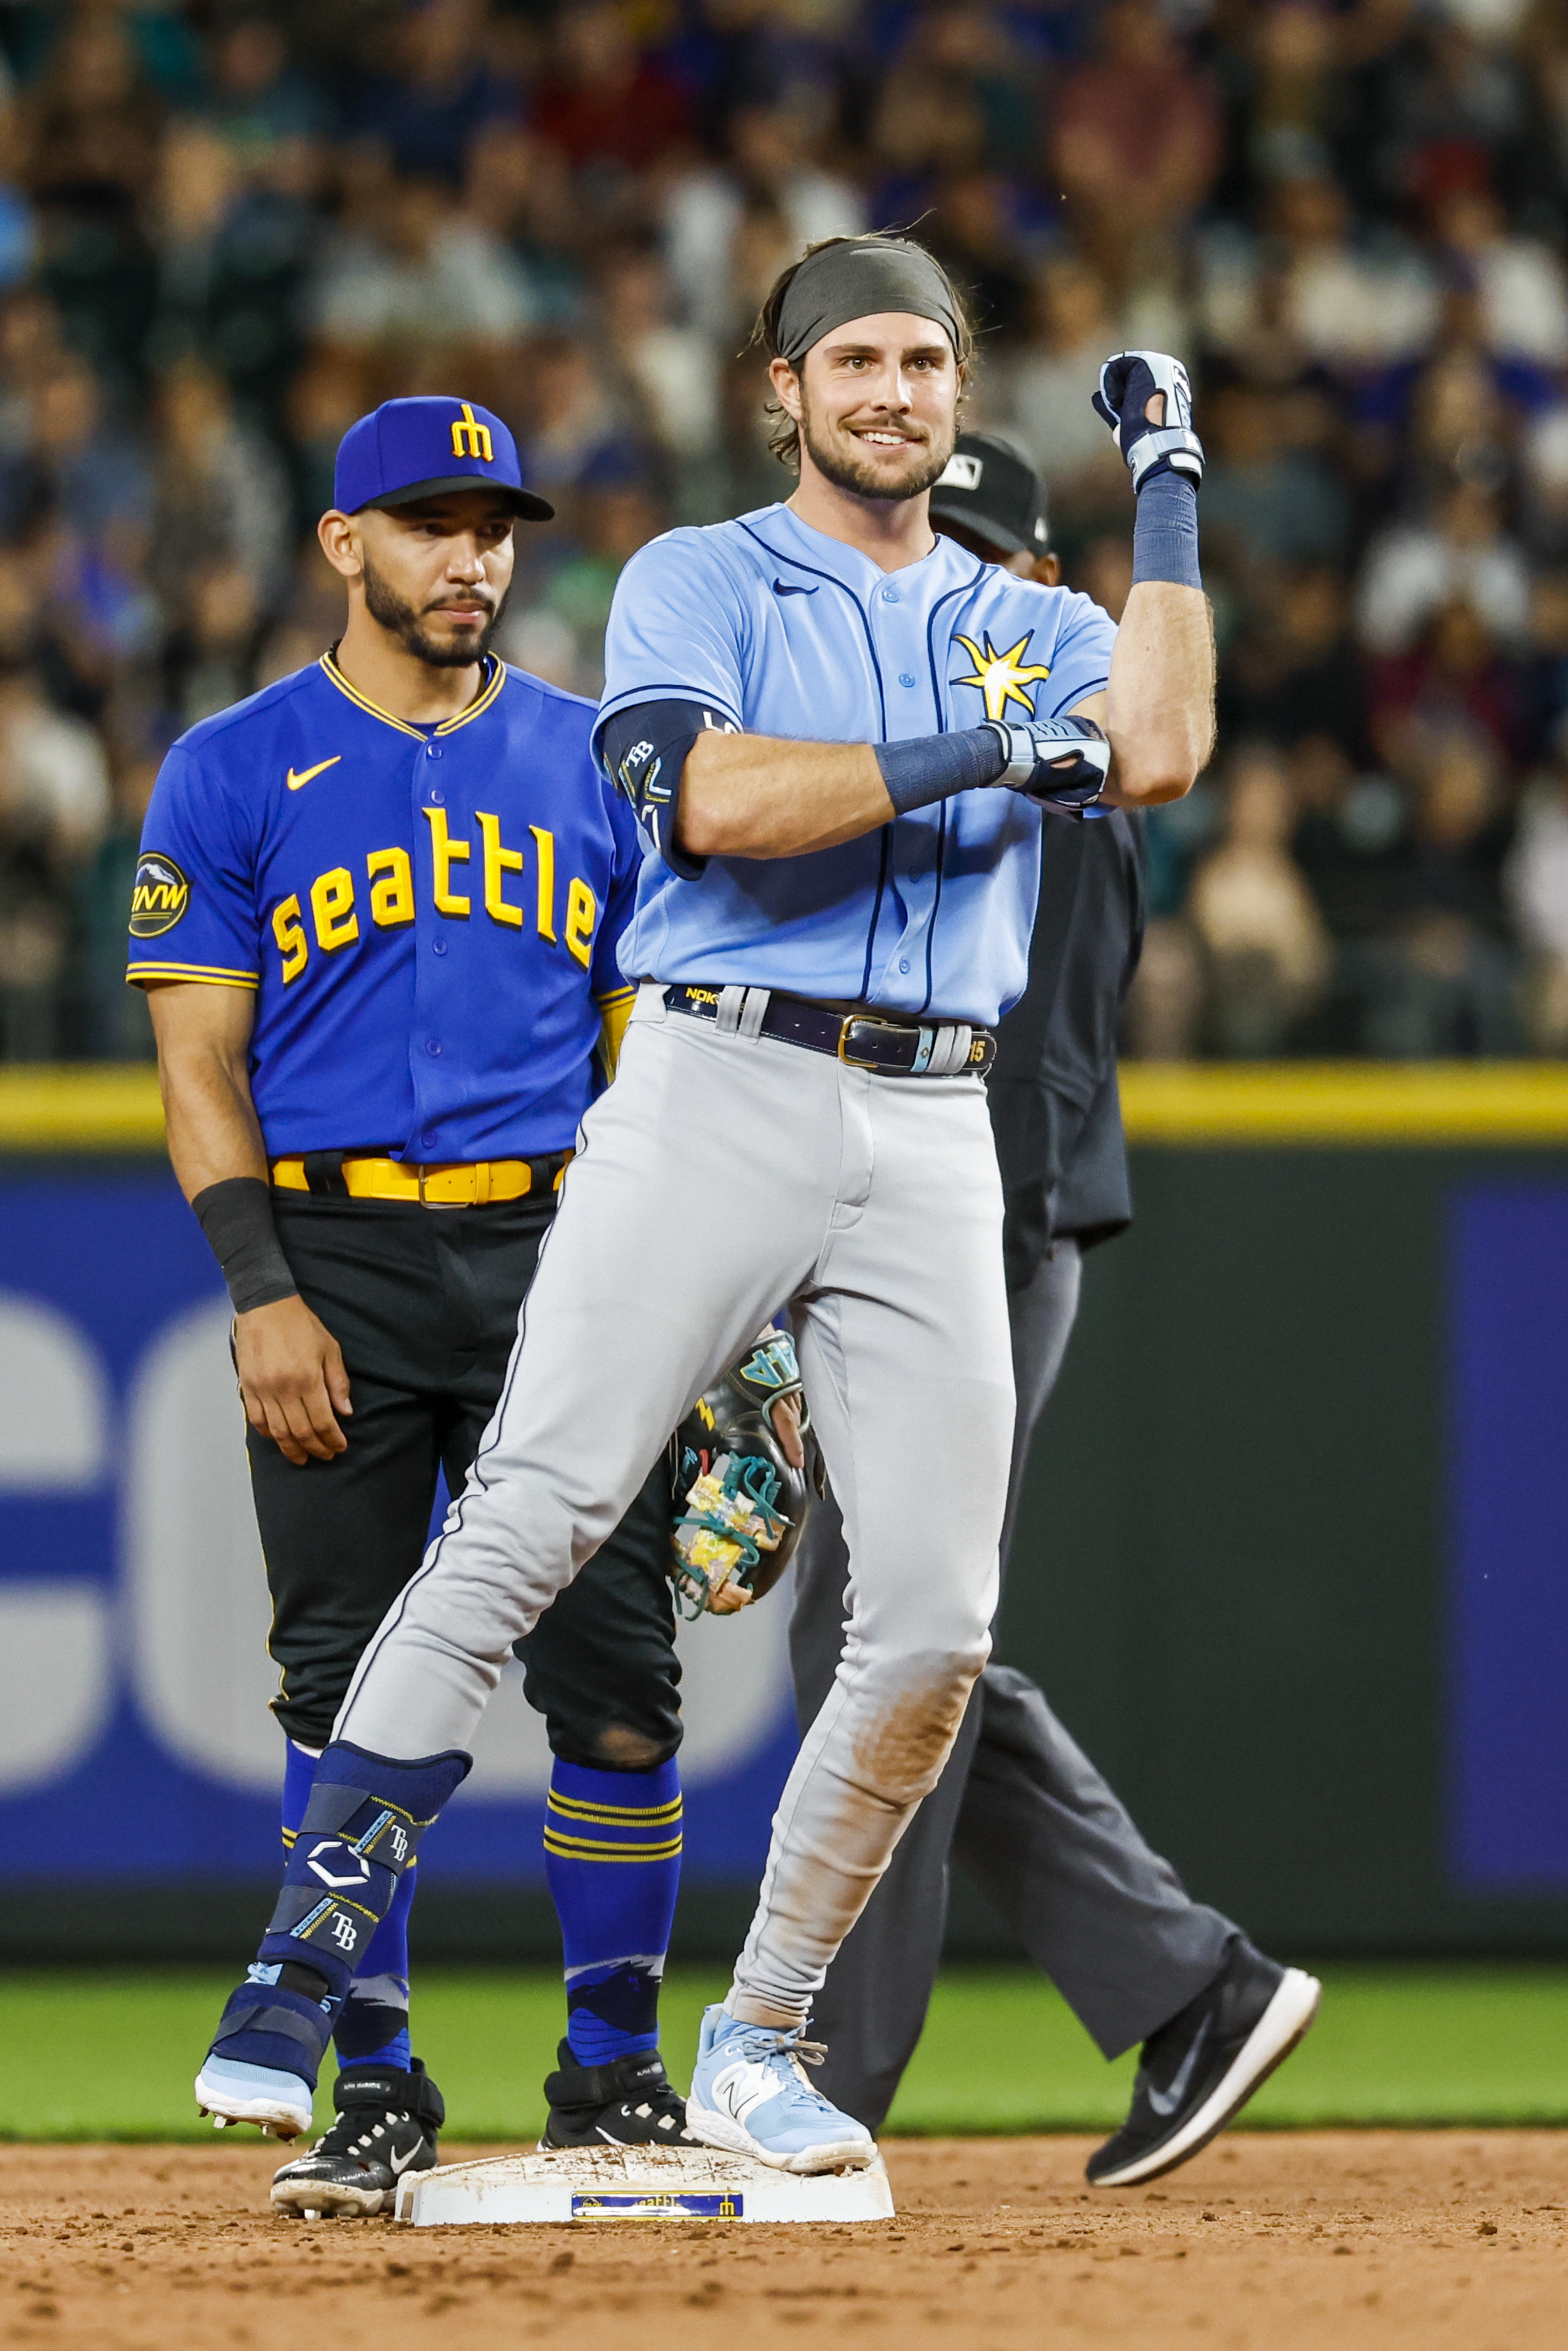 Mariners Become a Tale of Two Teams, Lose to Rays 7-4 - Lookout